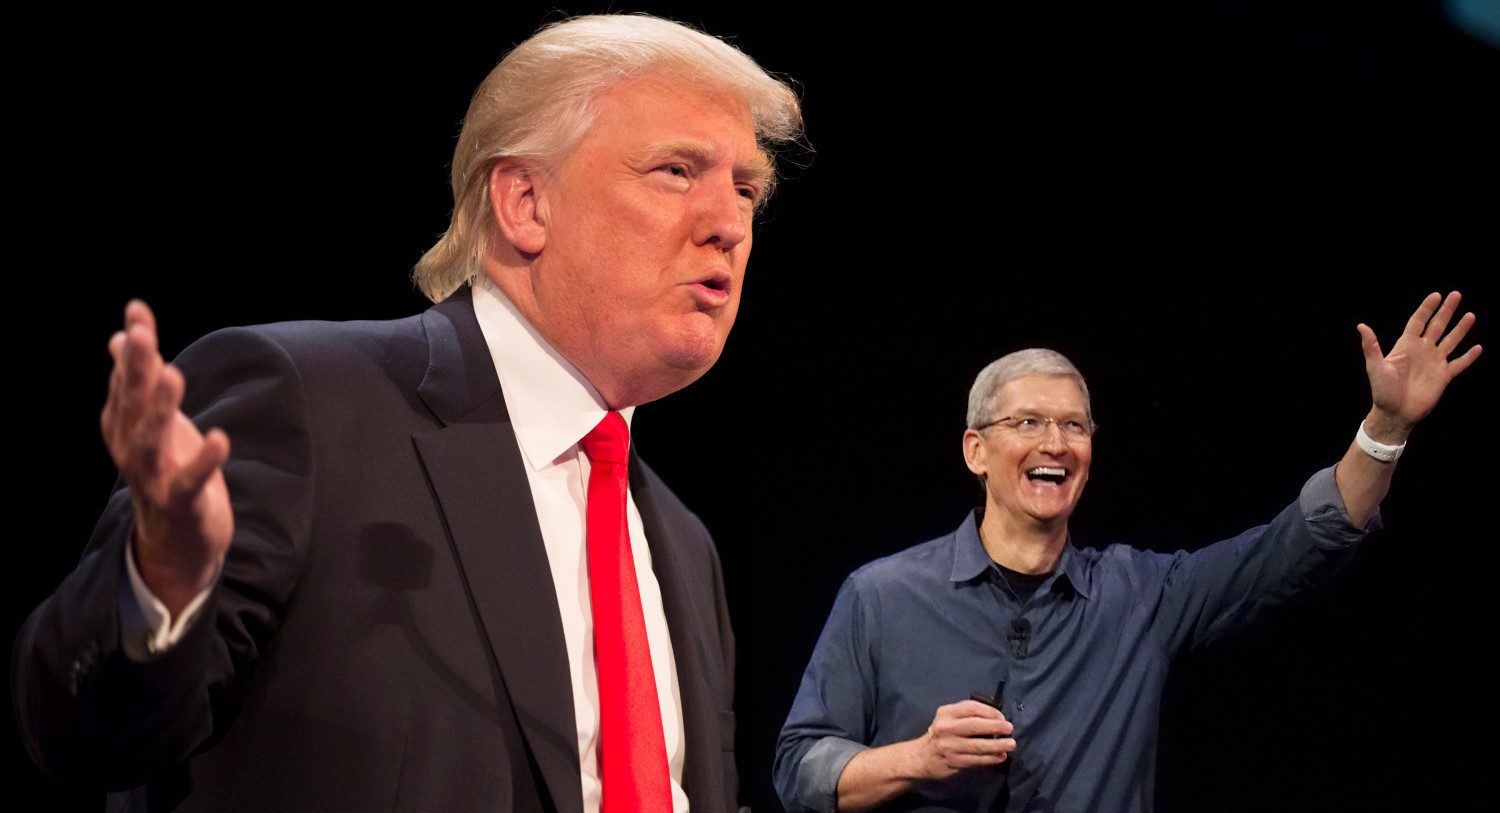 President Donald Trump and Tim Cook